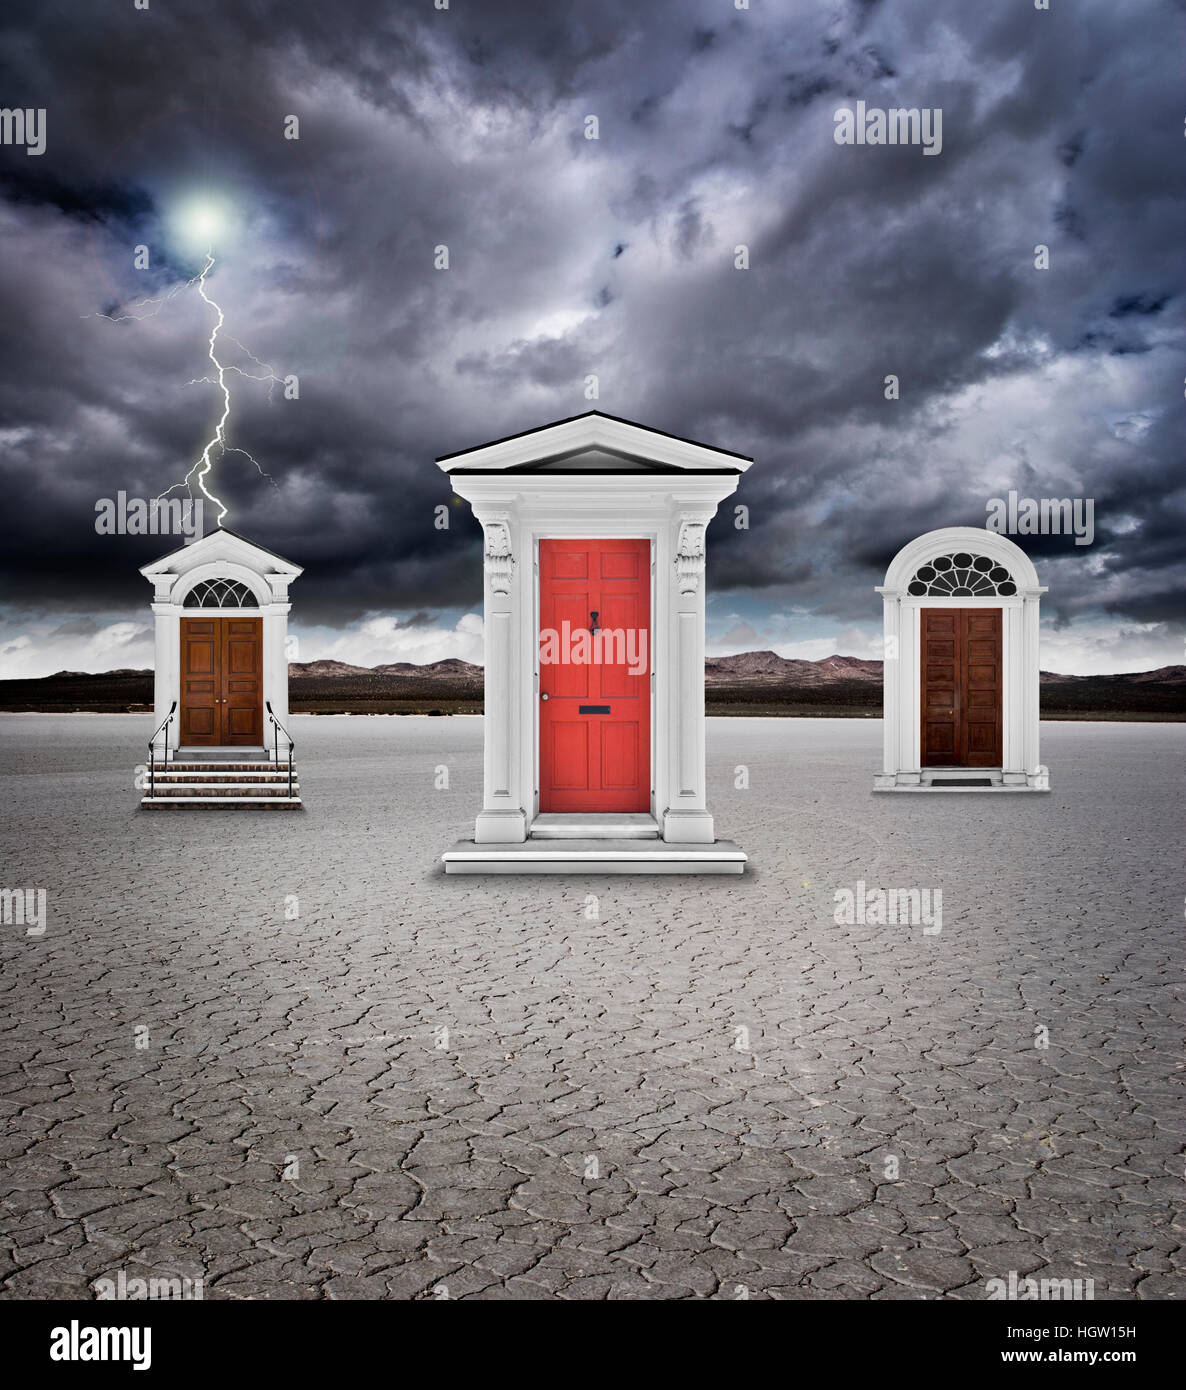 Three Doors In A Dry Lake Bed With Lightning In Sky Stock Photo